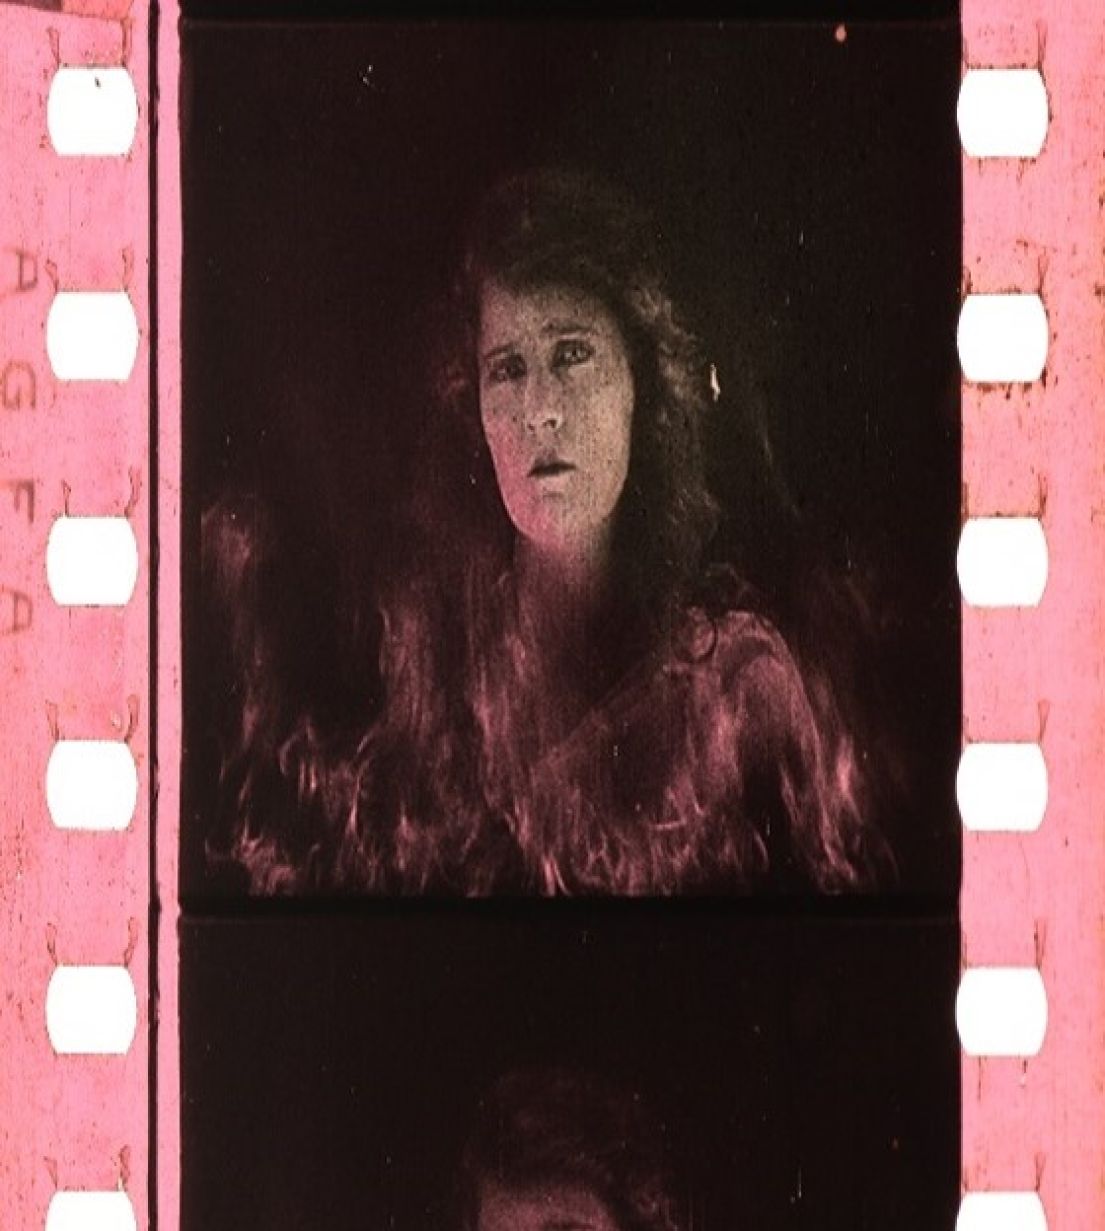 Section of film negative showing a woman's ghostly face surrounded by flames.